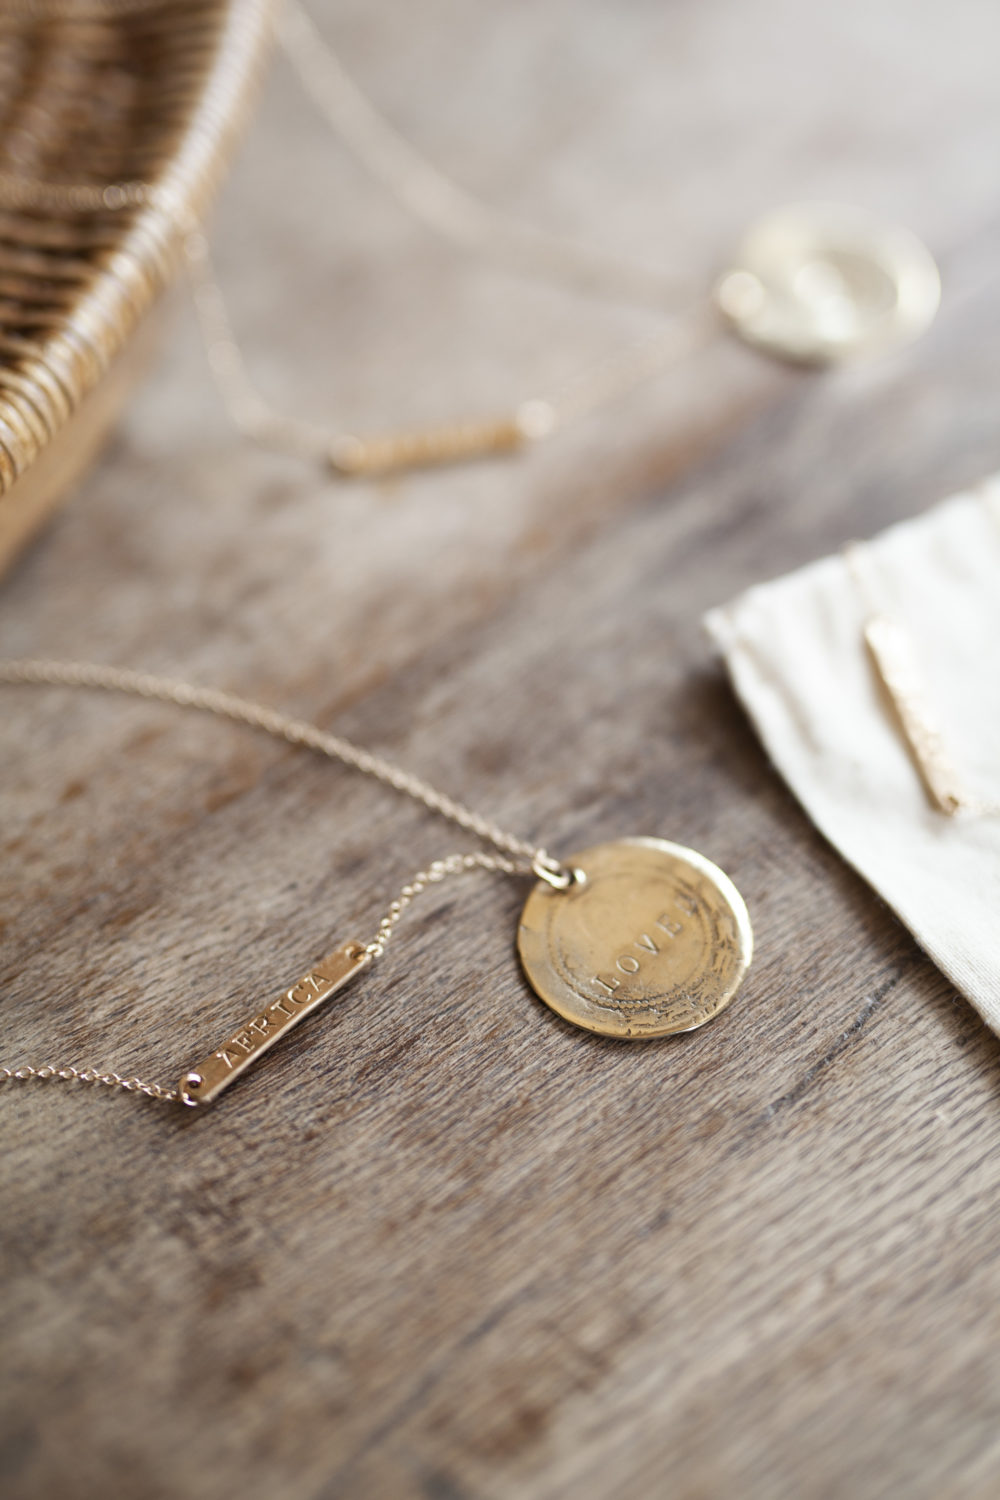 Close up of a gold chain necklace on a wooden table.